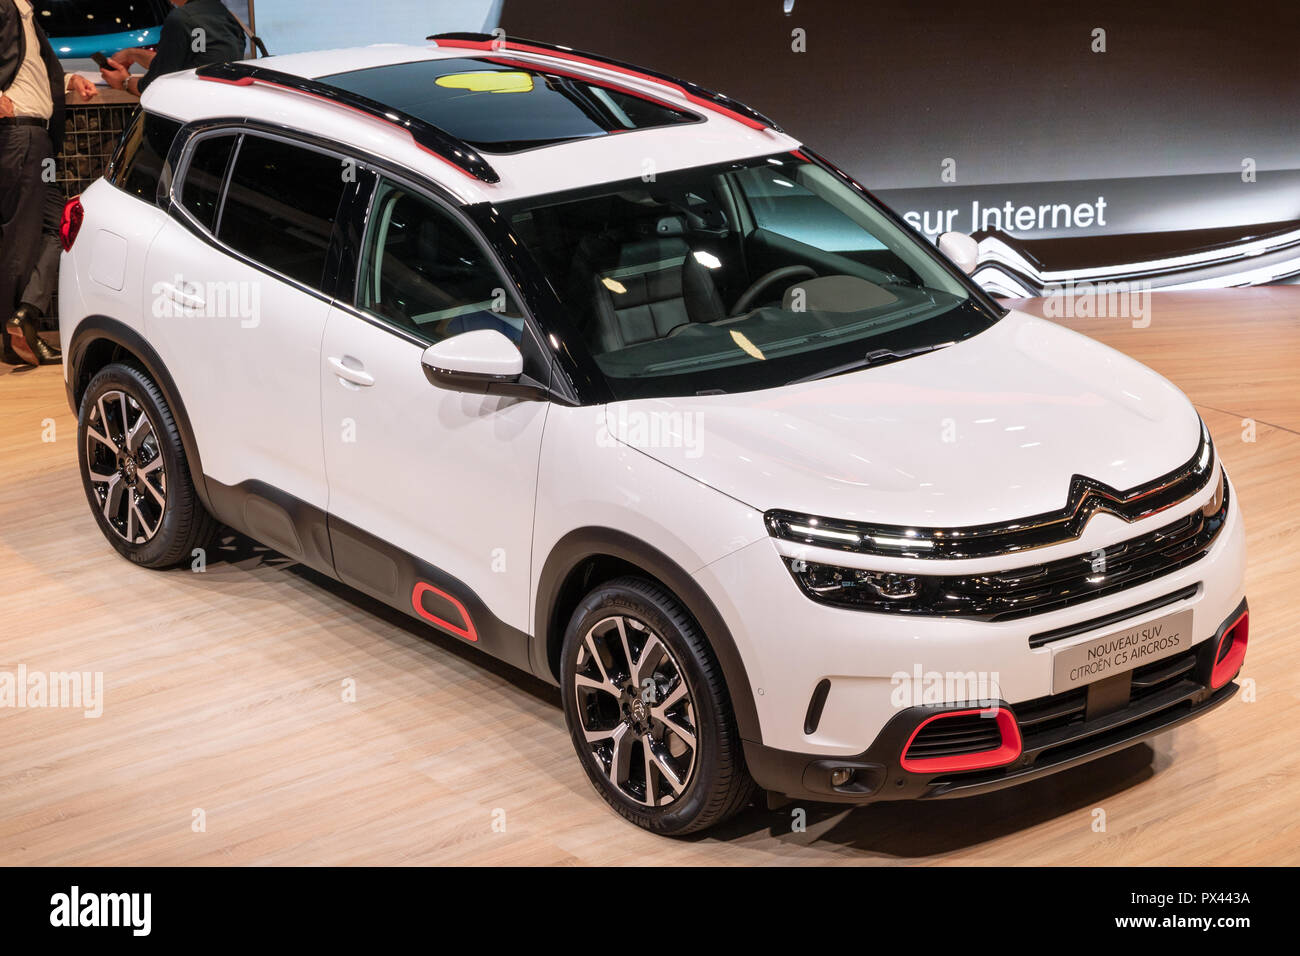 C5 aircross hi-res stock photography and images - Alamy